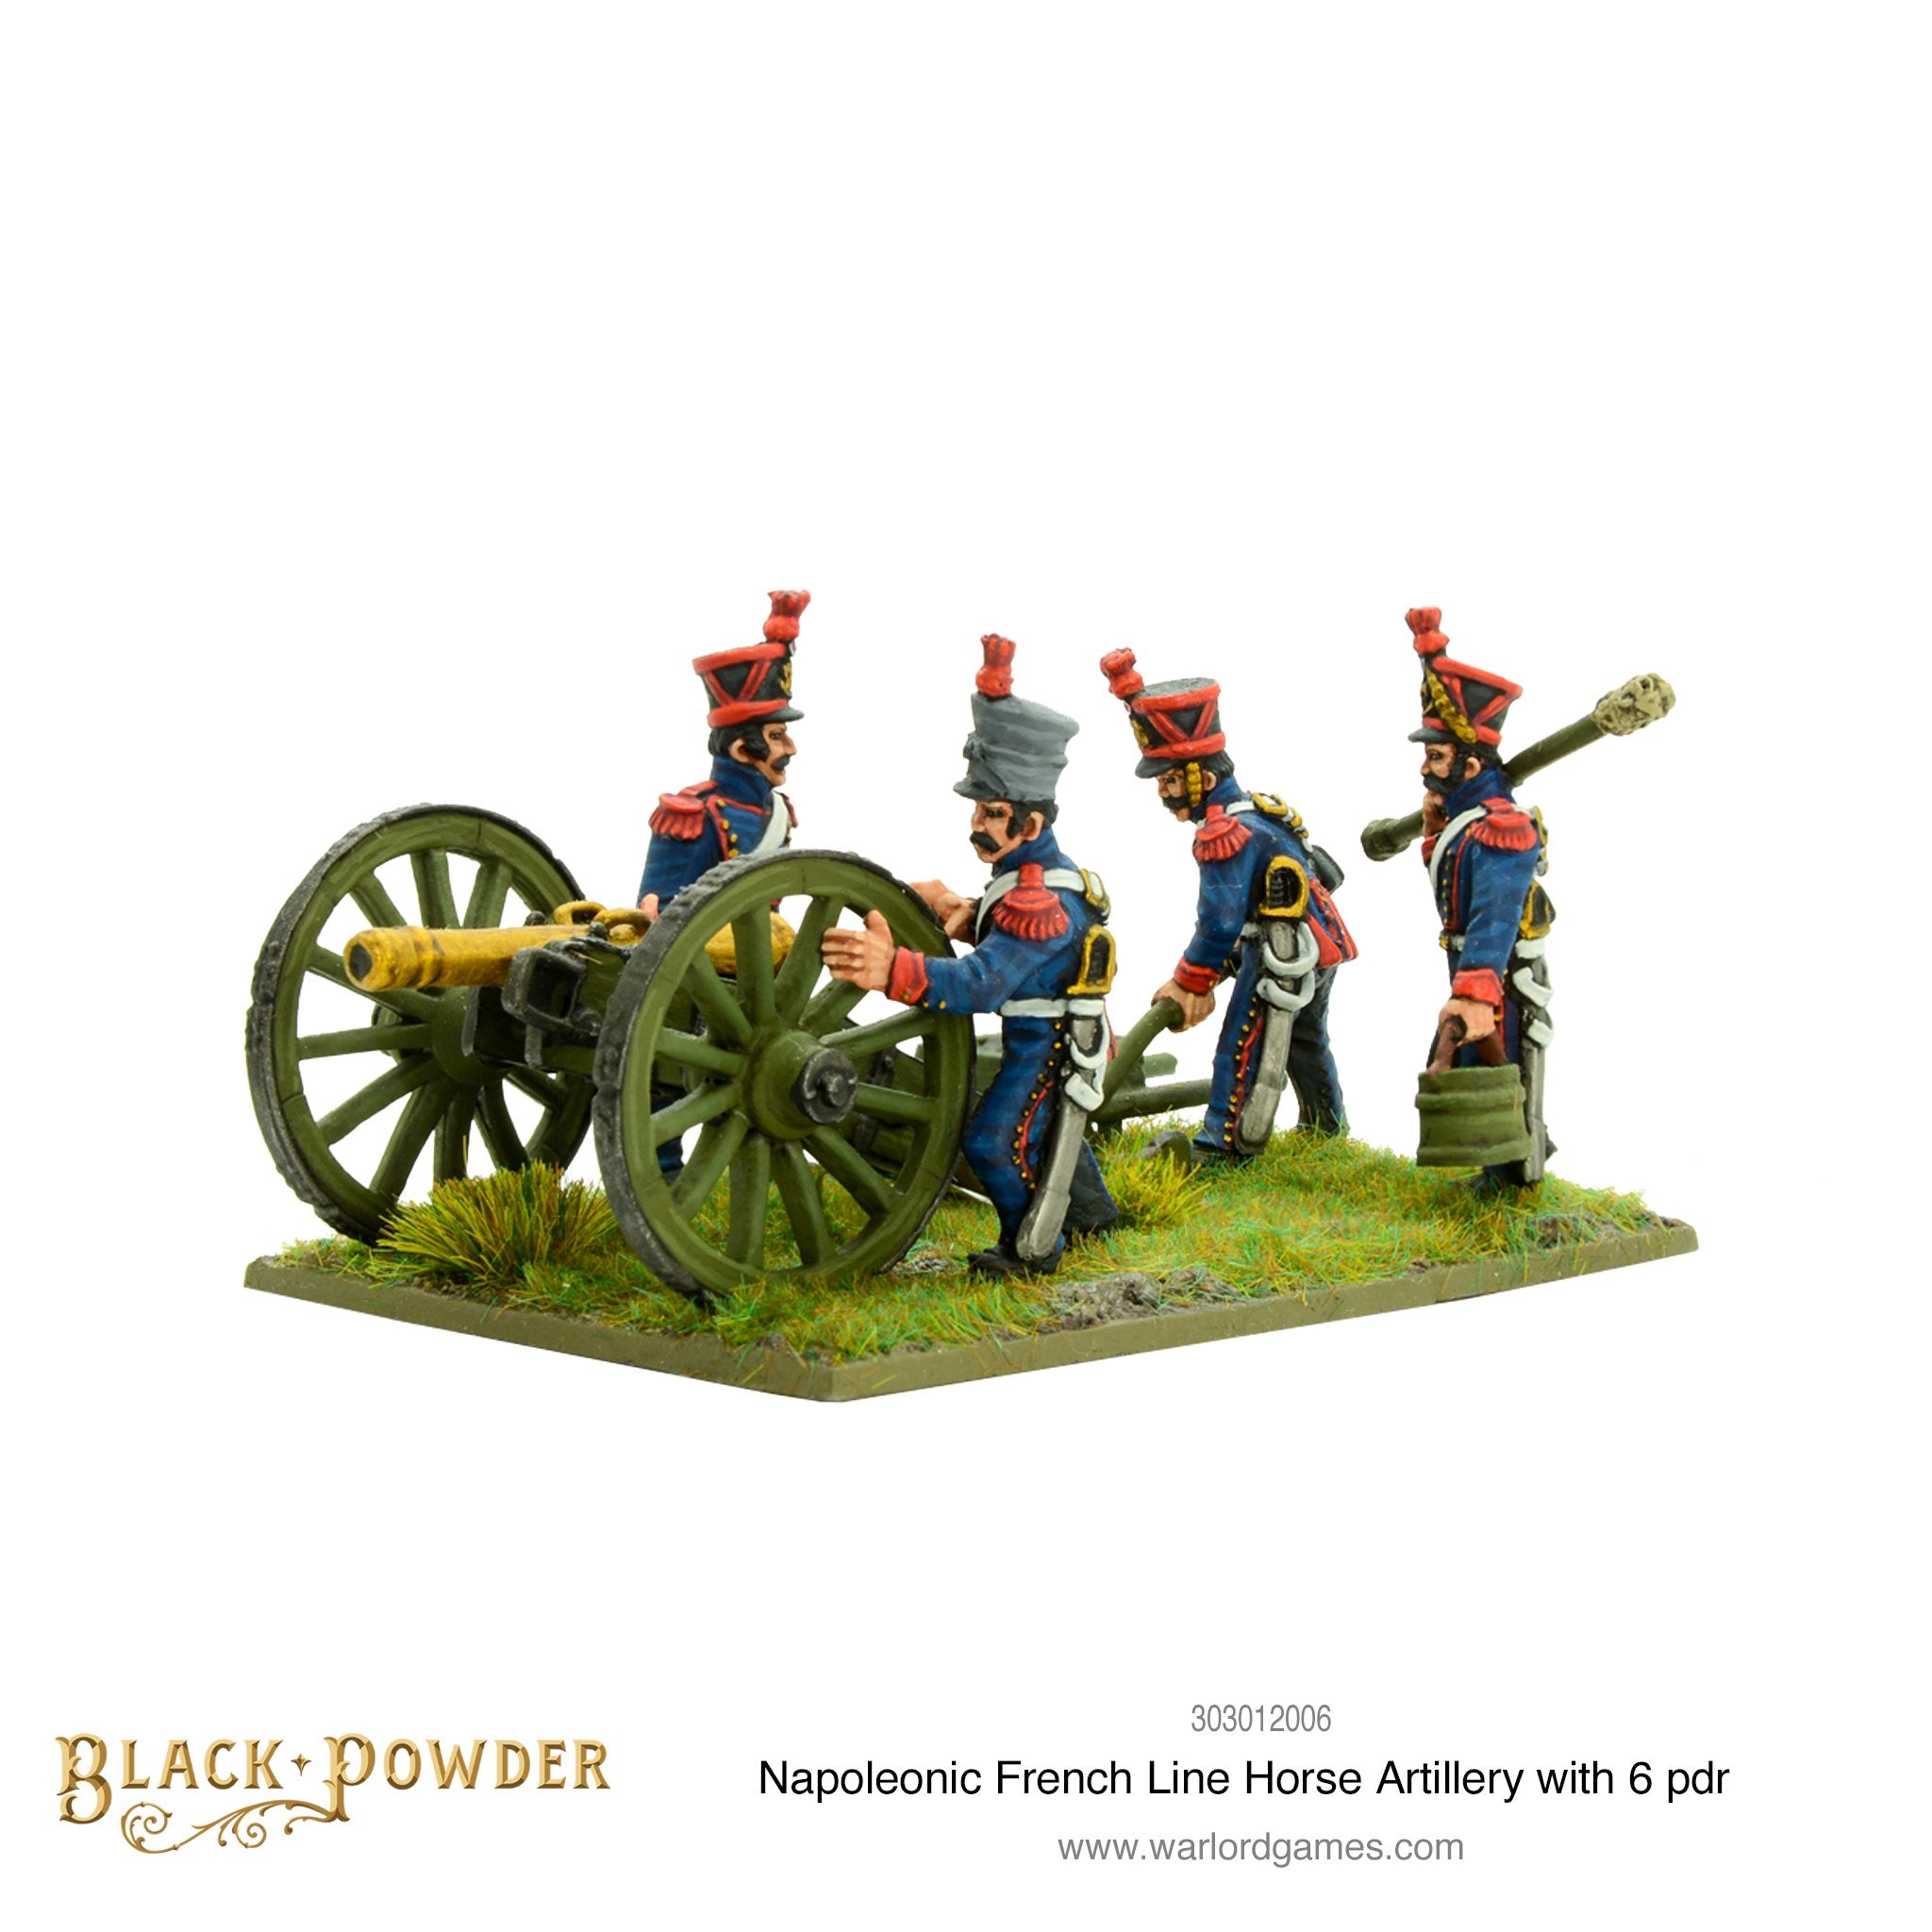 Napoleonic French Line Horse Artillery with 6 pdr